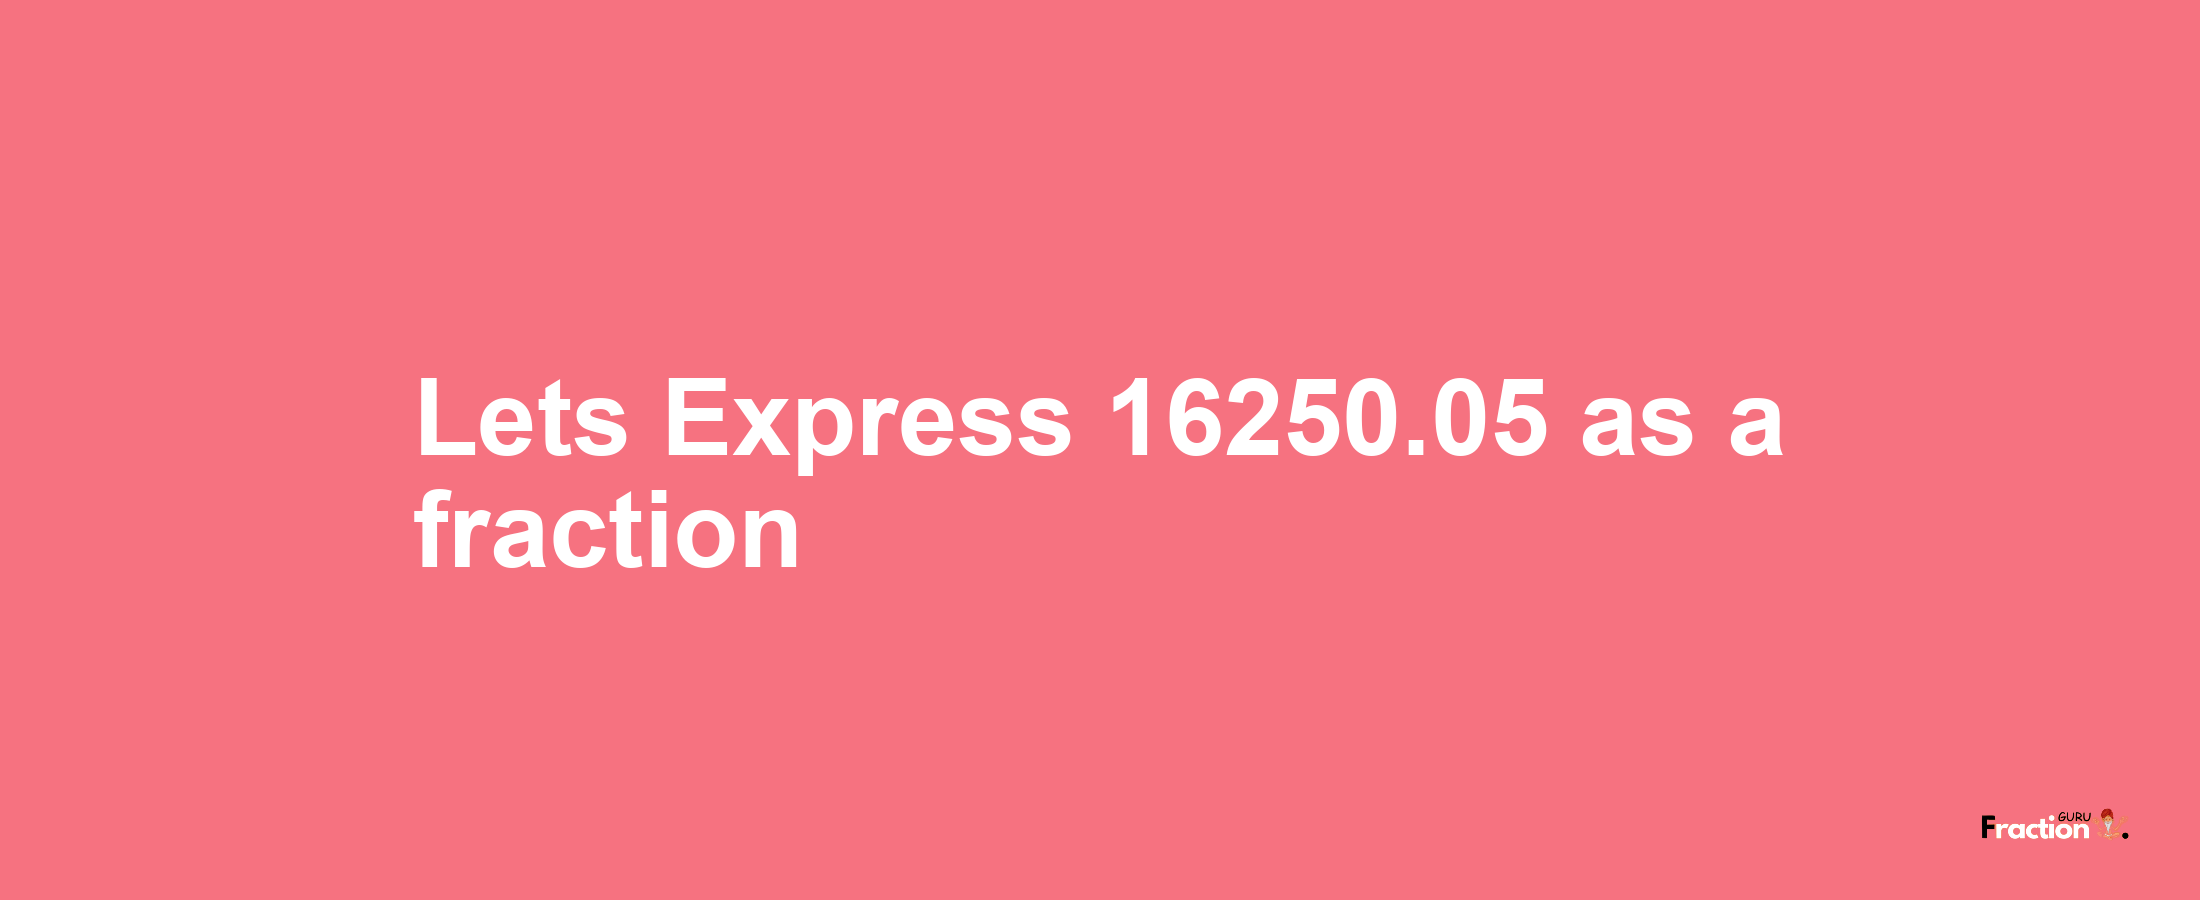 Lets Express 16250.05 as afraction